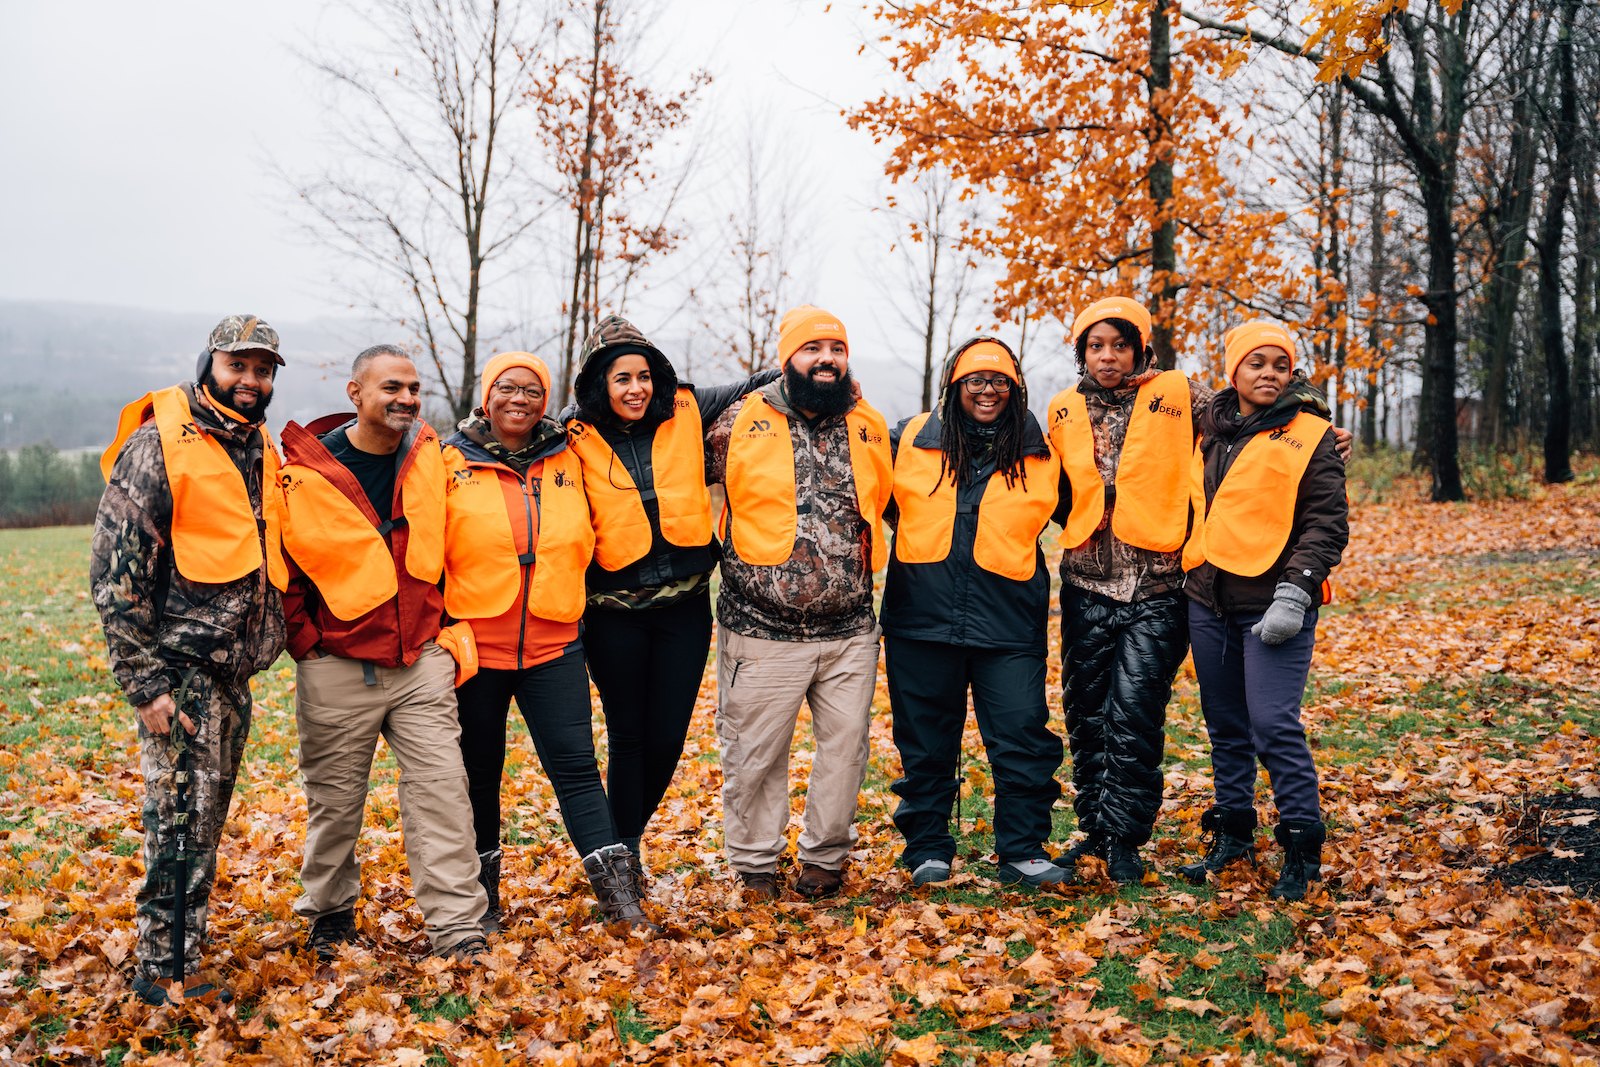 a group of people in hunting gear gather for a group photo